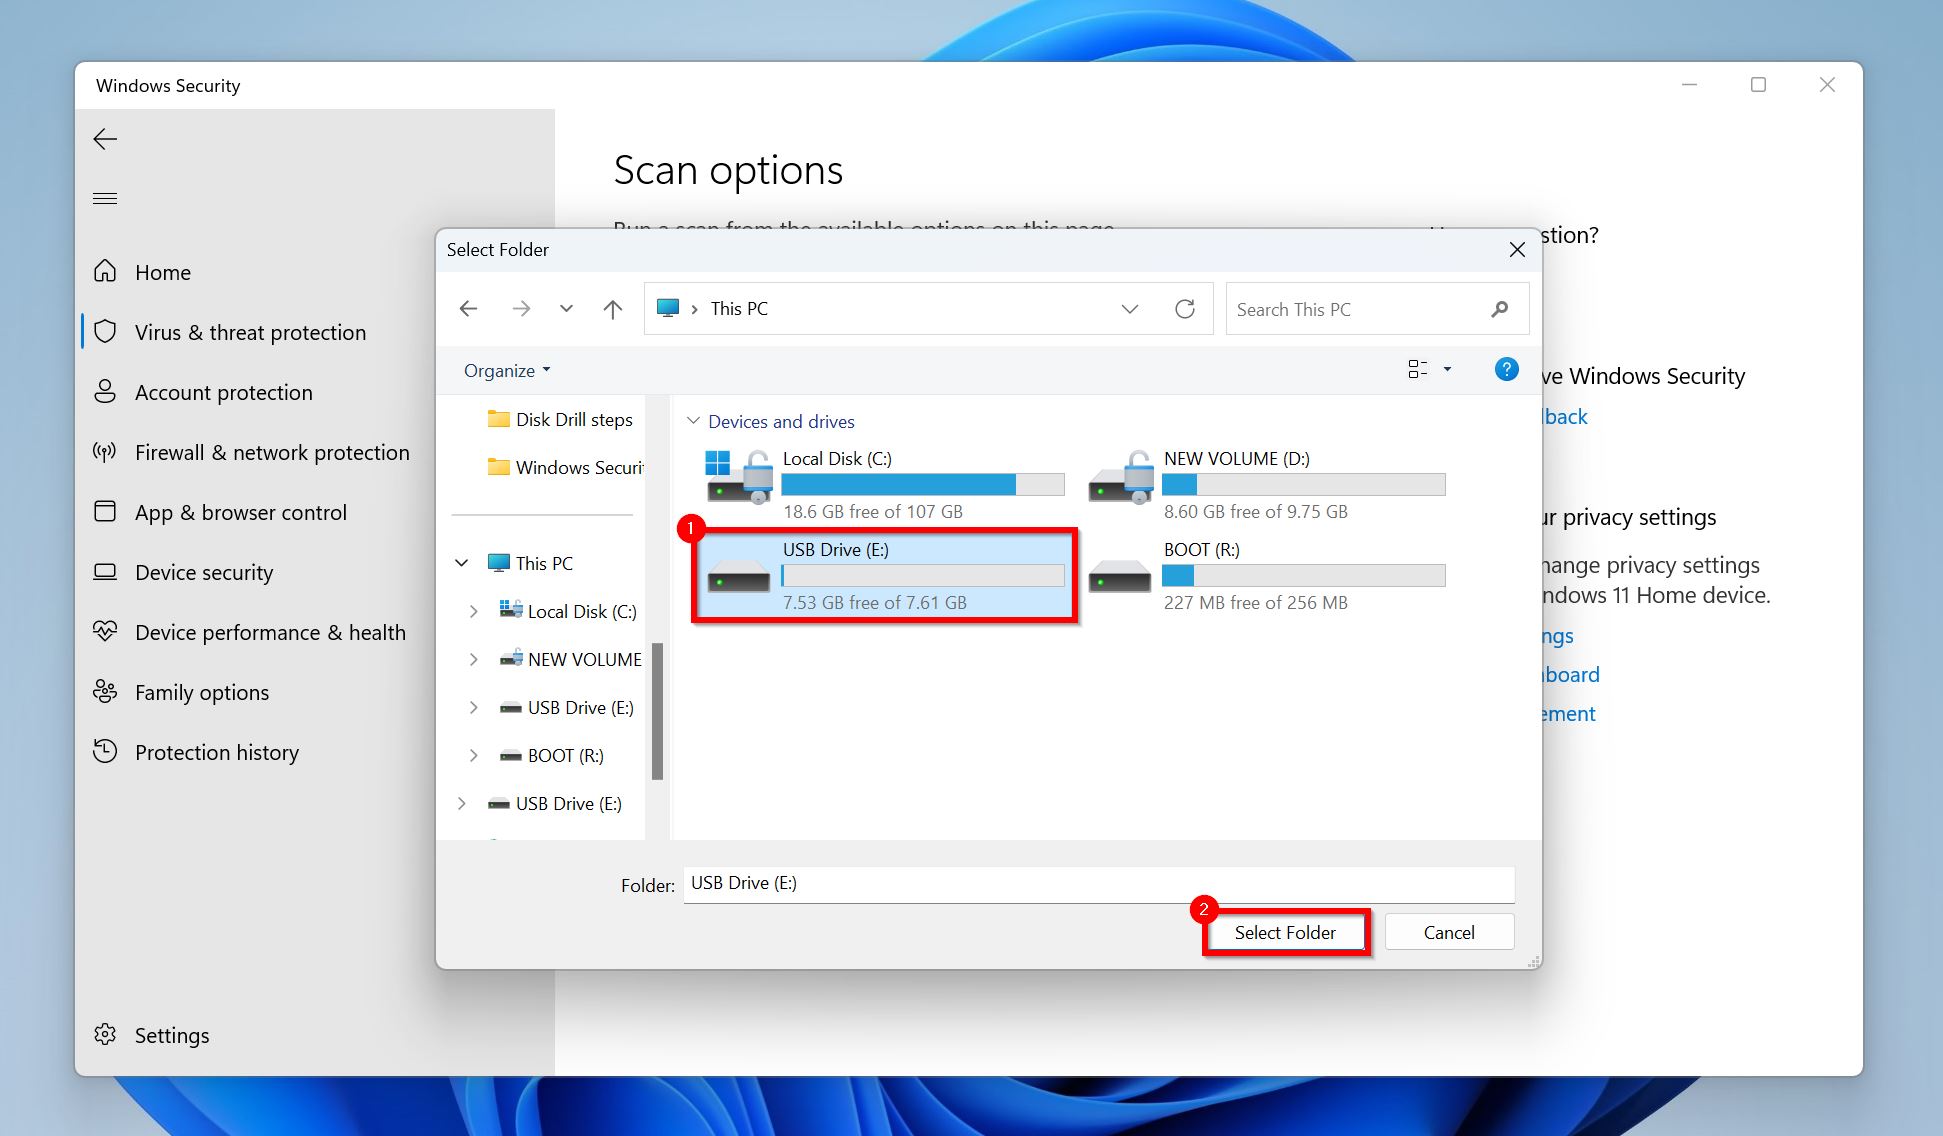 Windows Security Scan options window with a file explorer dialog open to select a specific folder for scanning.